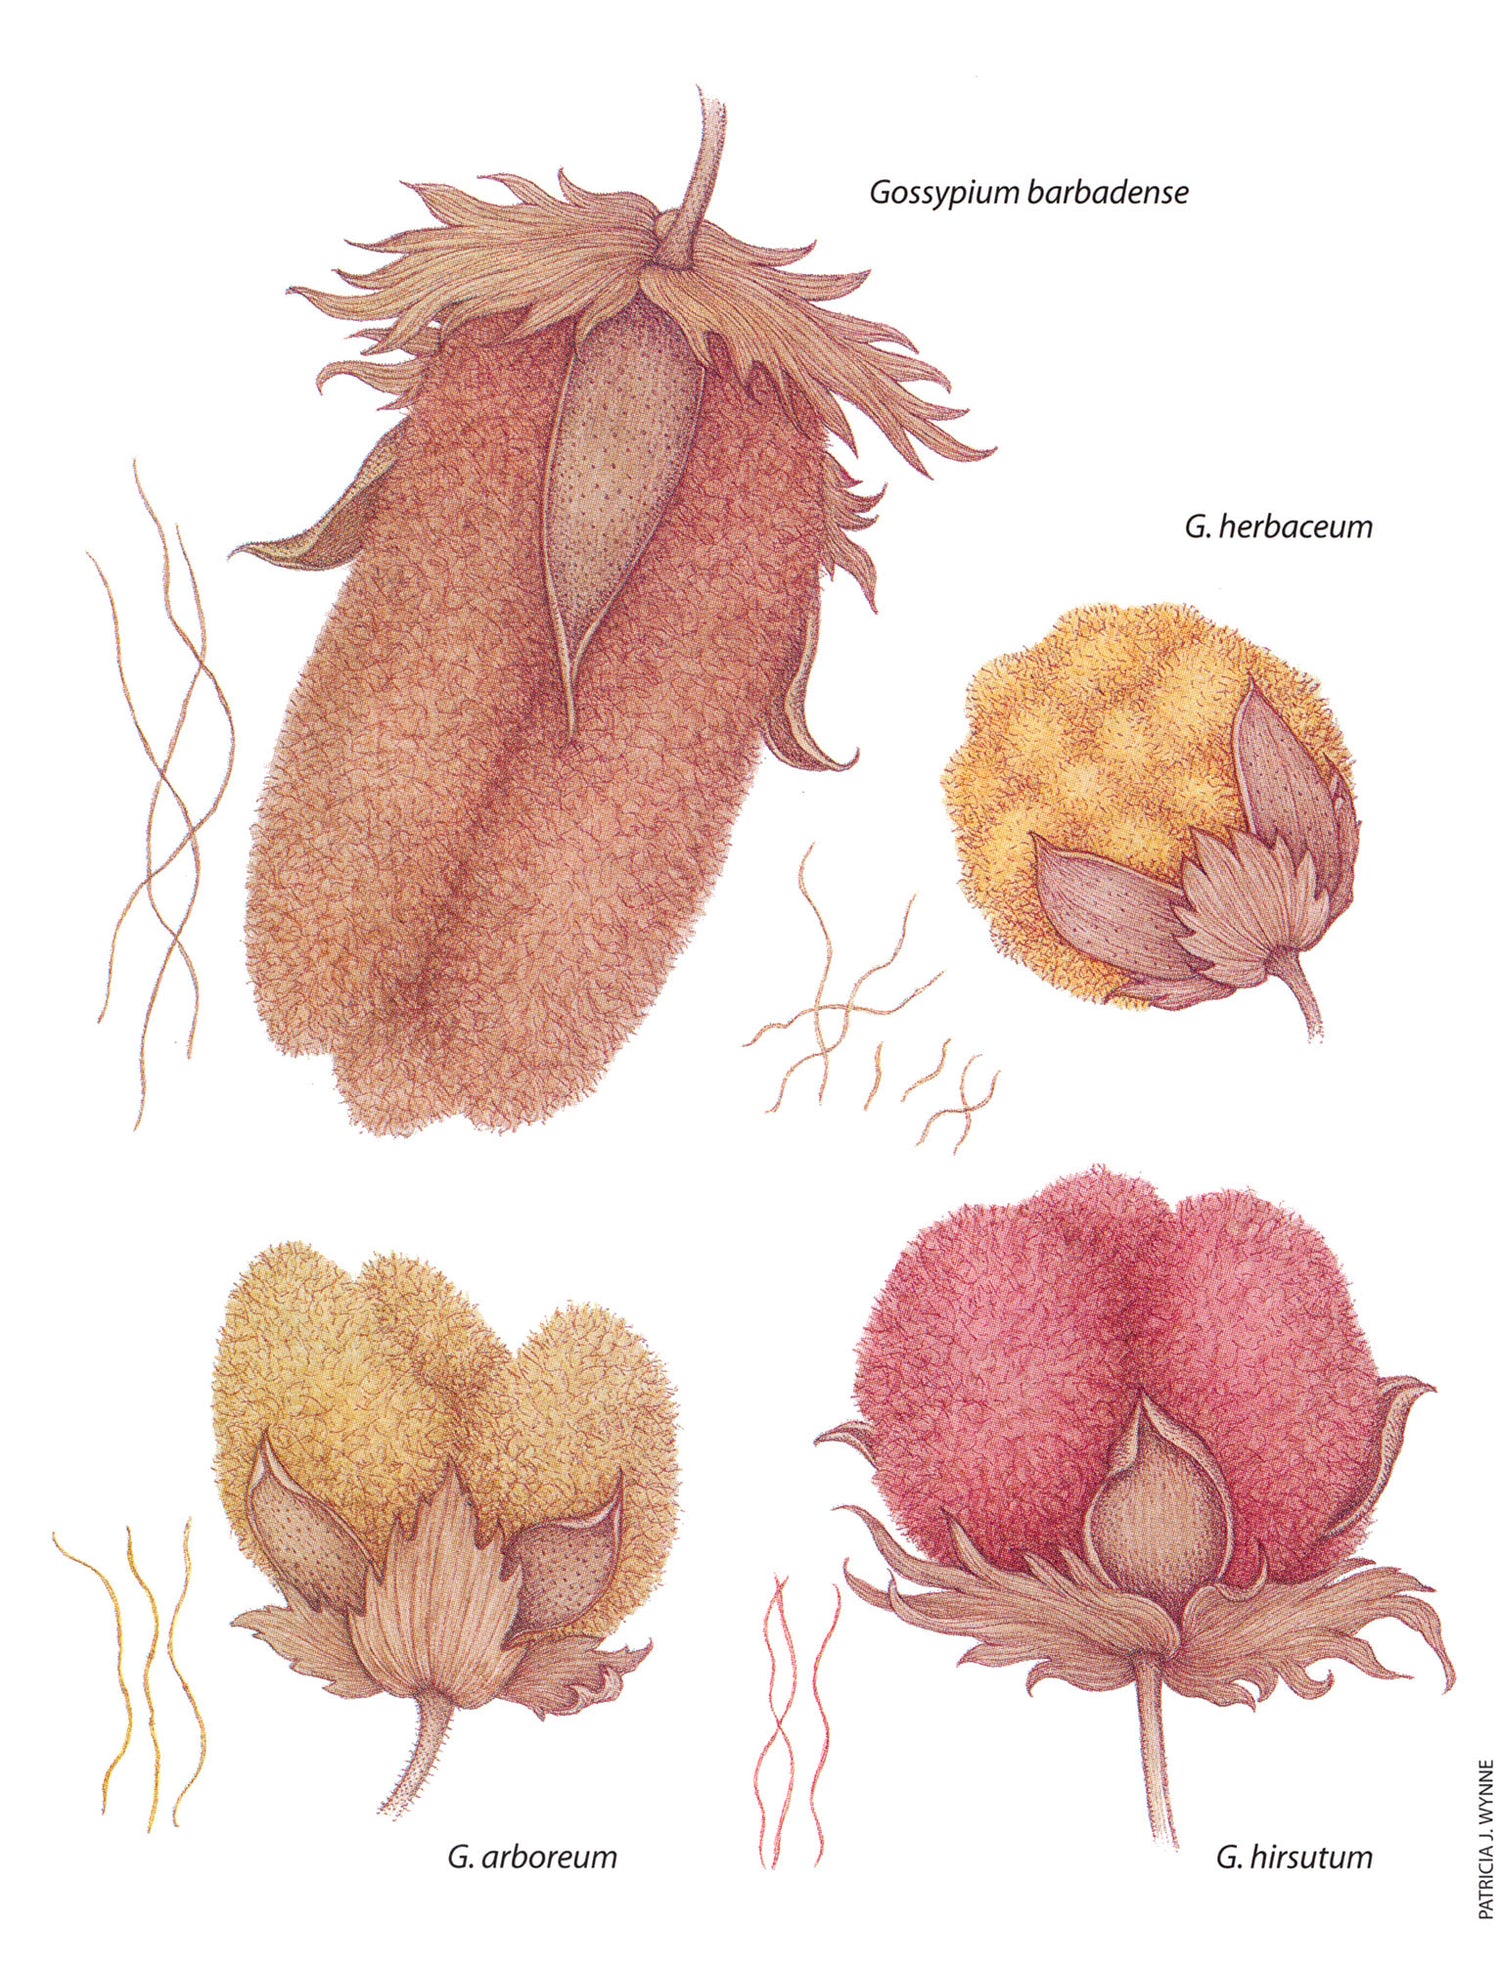 Four species of cotton. “The revival of colored cotton” by James, M. Vreeland. 1999